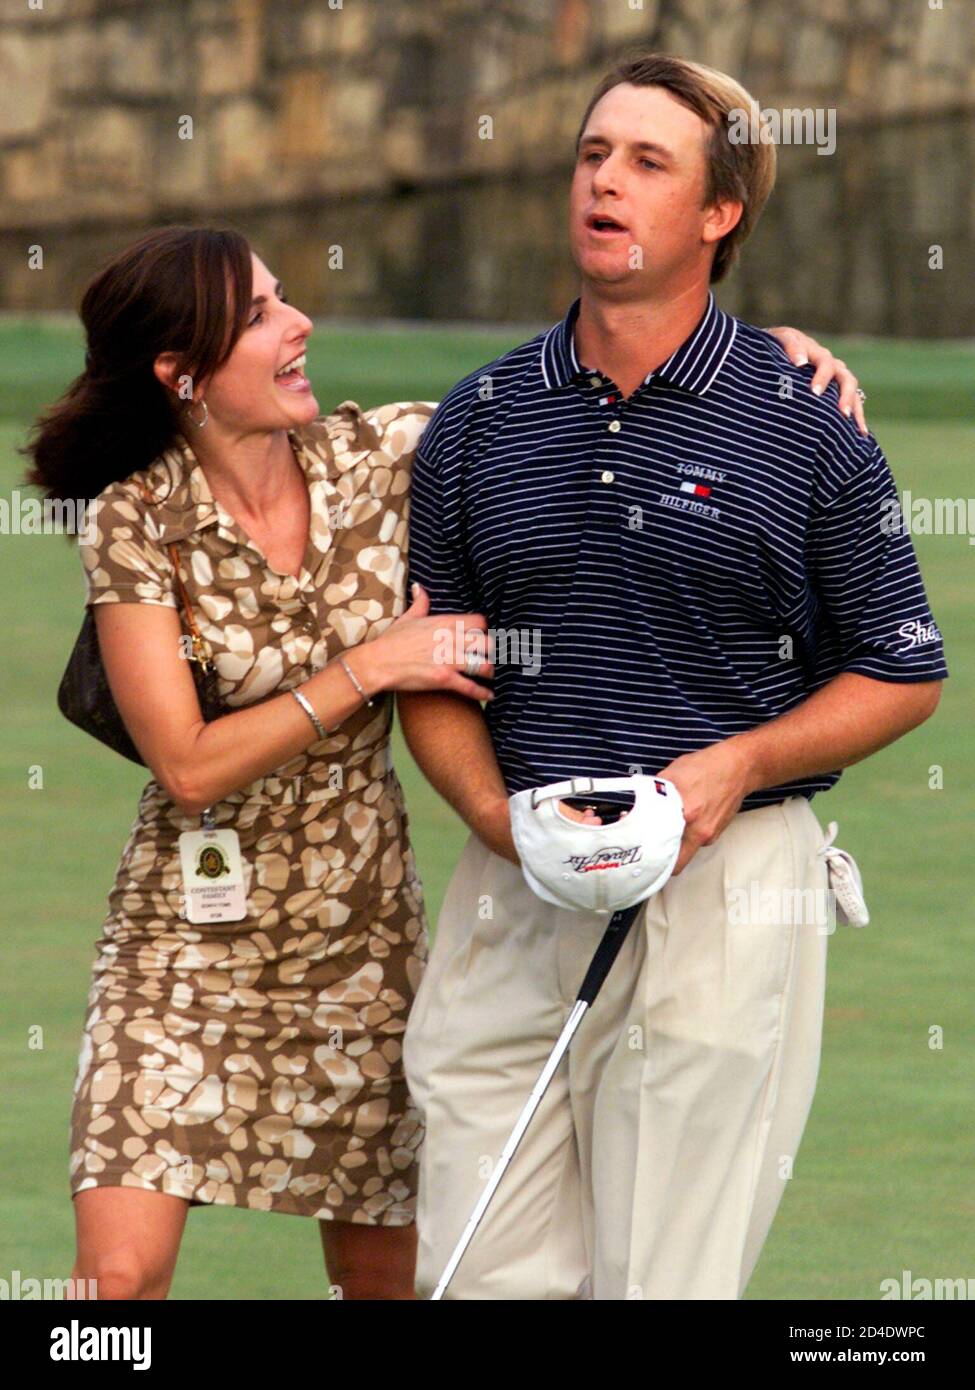 David Toms is greeted by his wife Sonya on the 18th green after he won the  83rd PGA Championship August 19, 2001 at the Atlanta Athletic Club in  Duluth, Georgia. Toms won